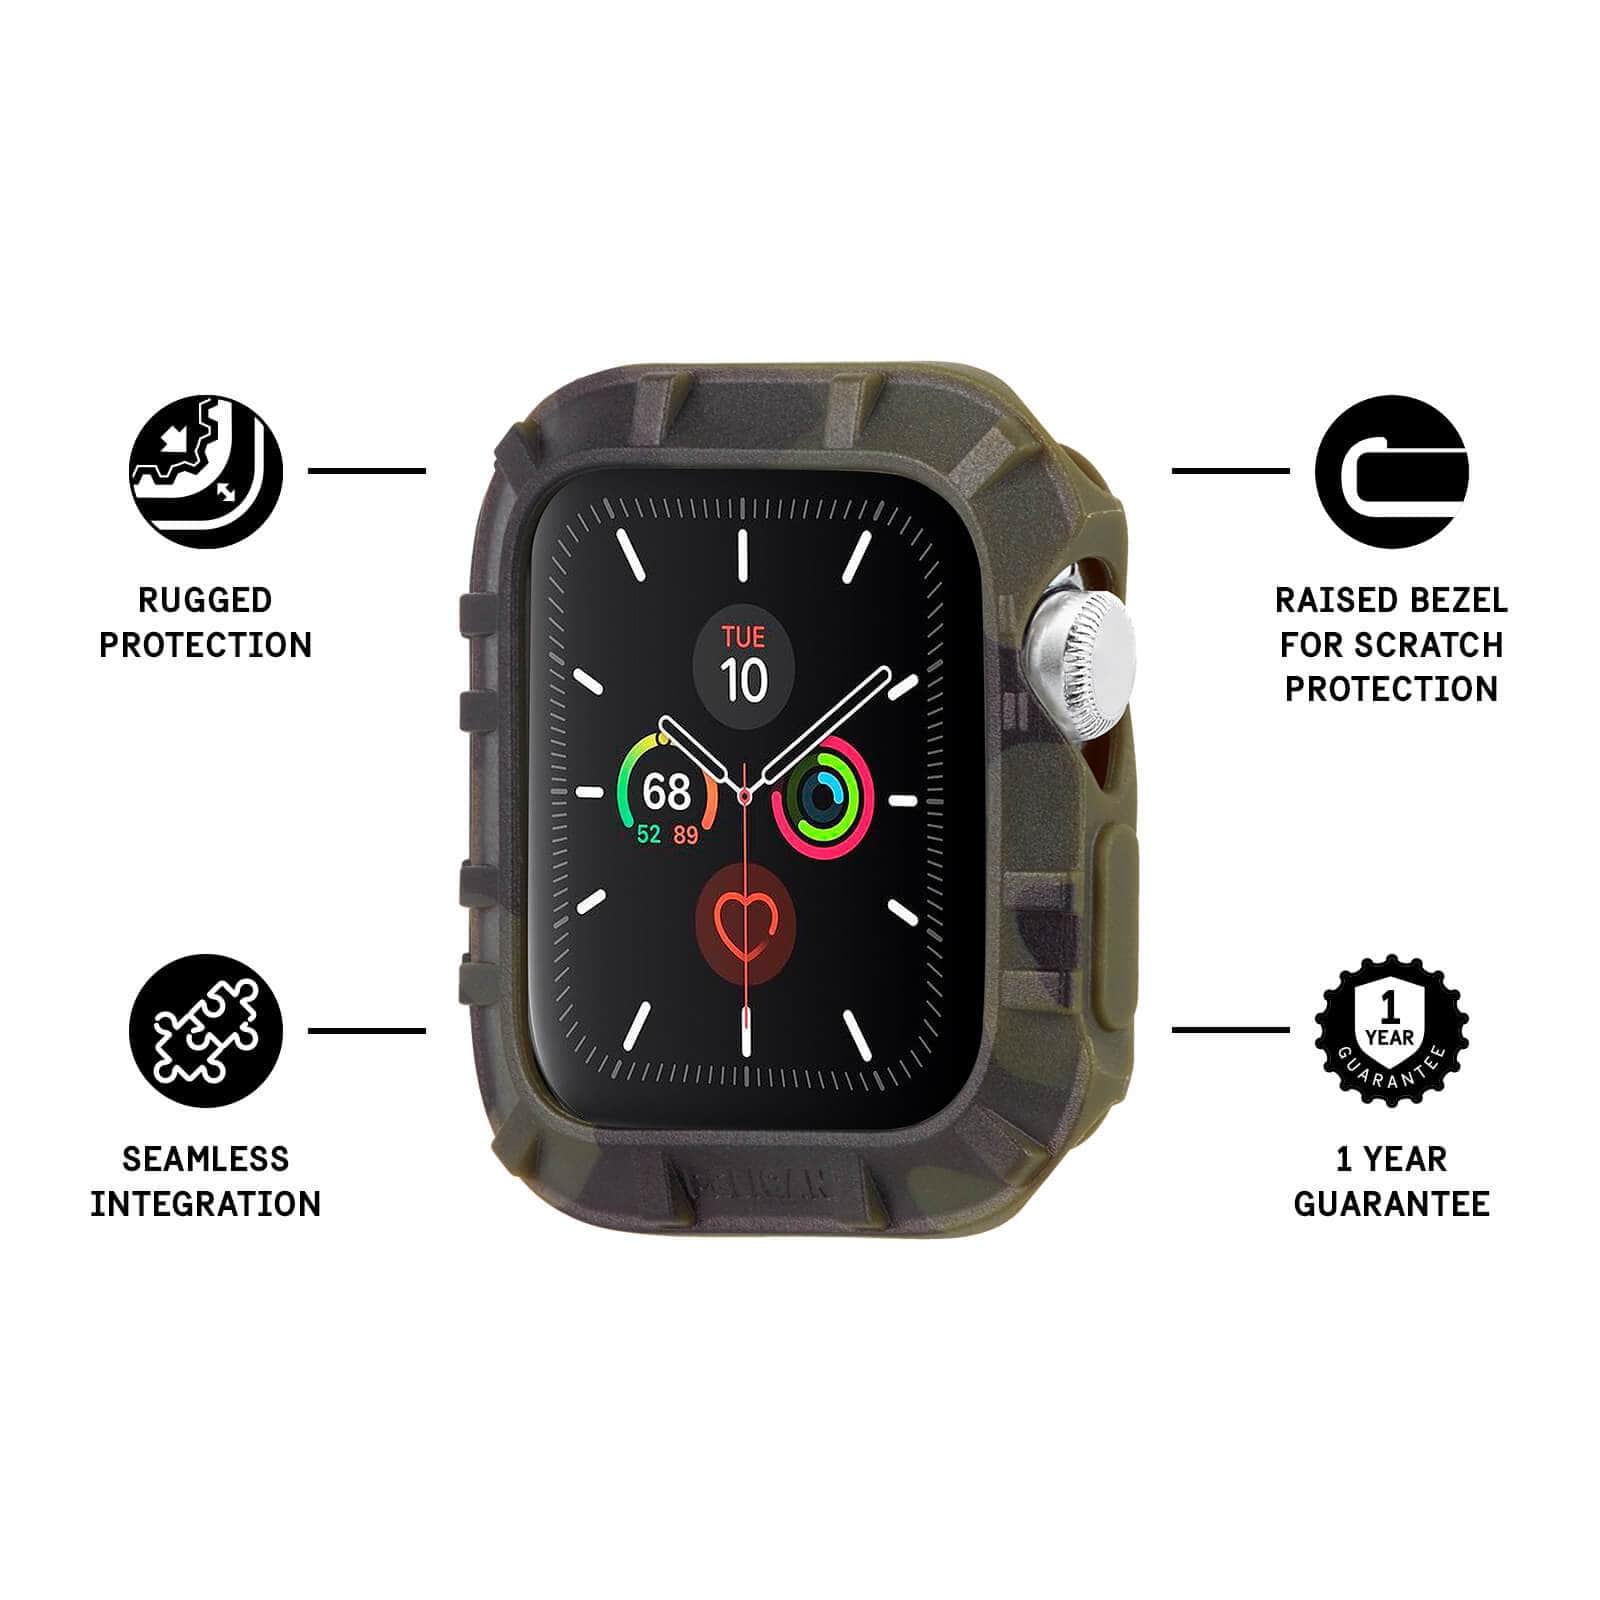 Features Rugged Protection, Seamless Integration, Raised Bezel for Scratch Protection, 1 year guarantee. color::Camo Green